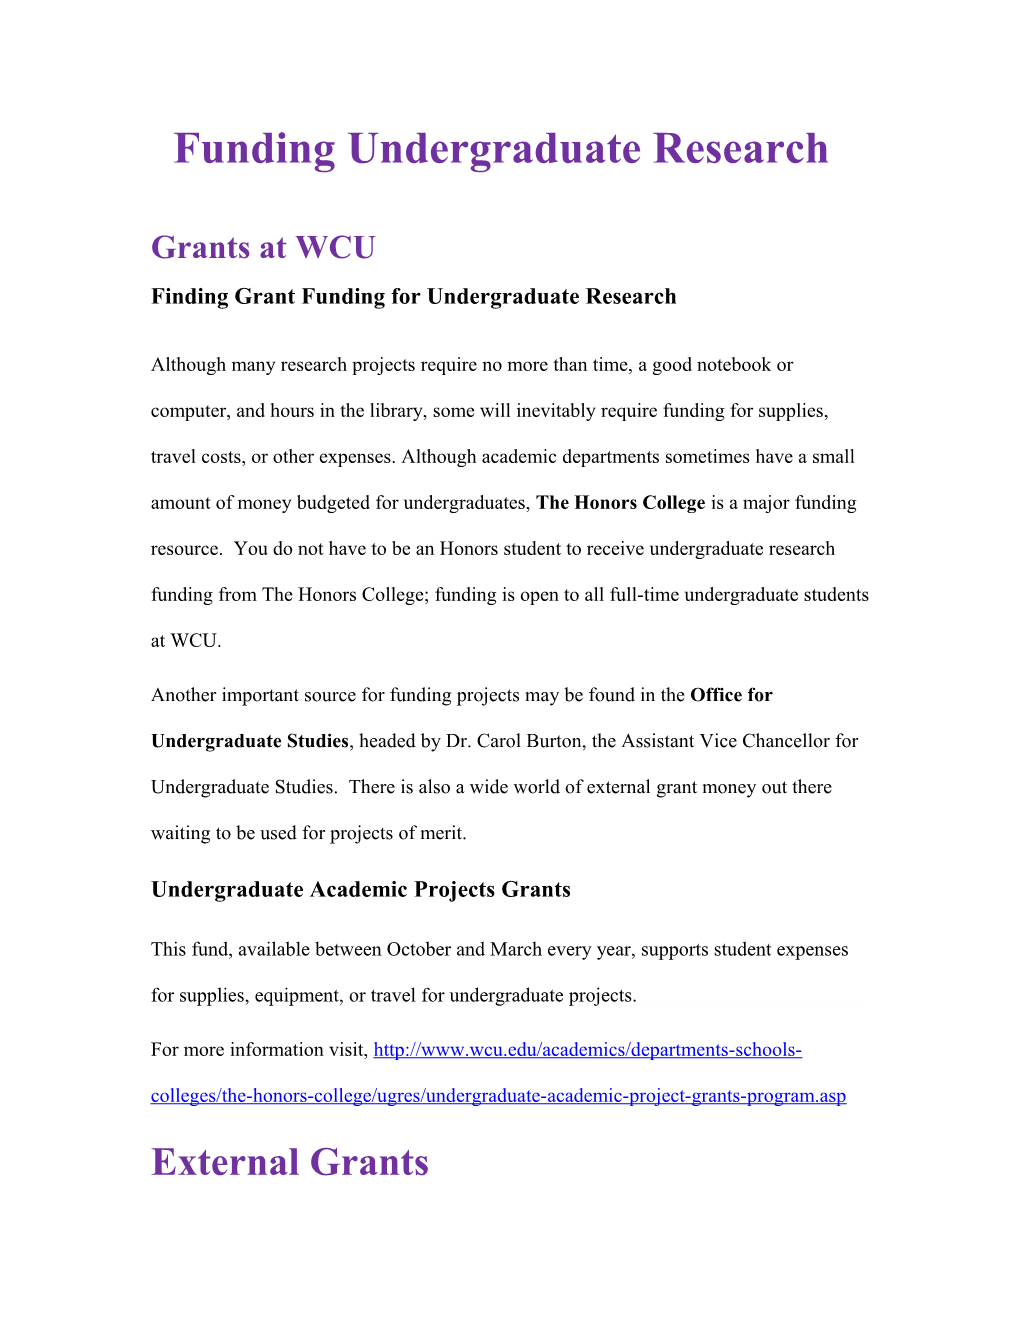 Finding Grant Funding for Undergraduate Research